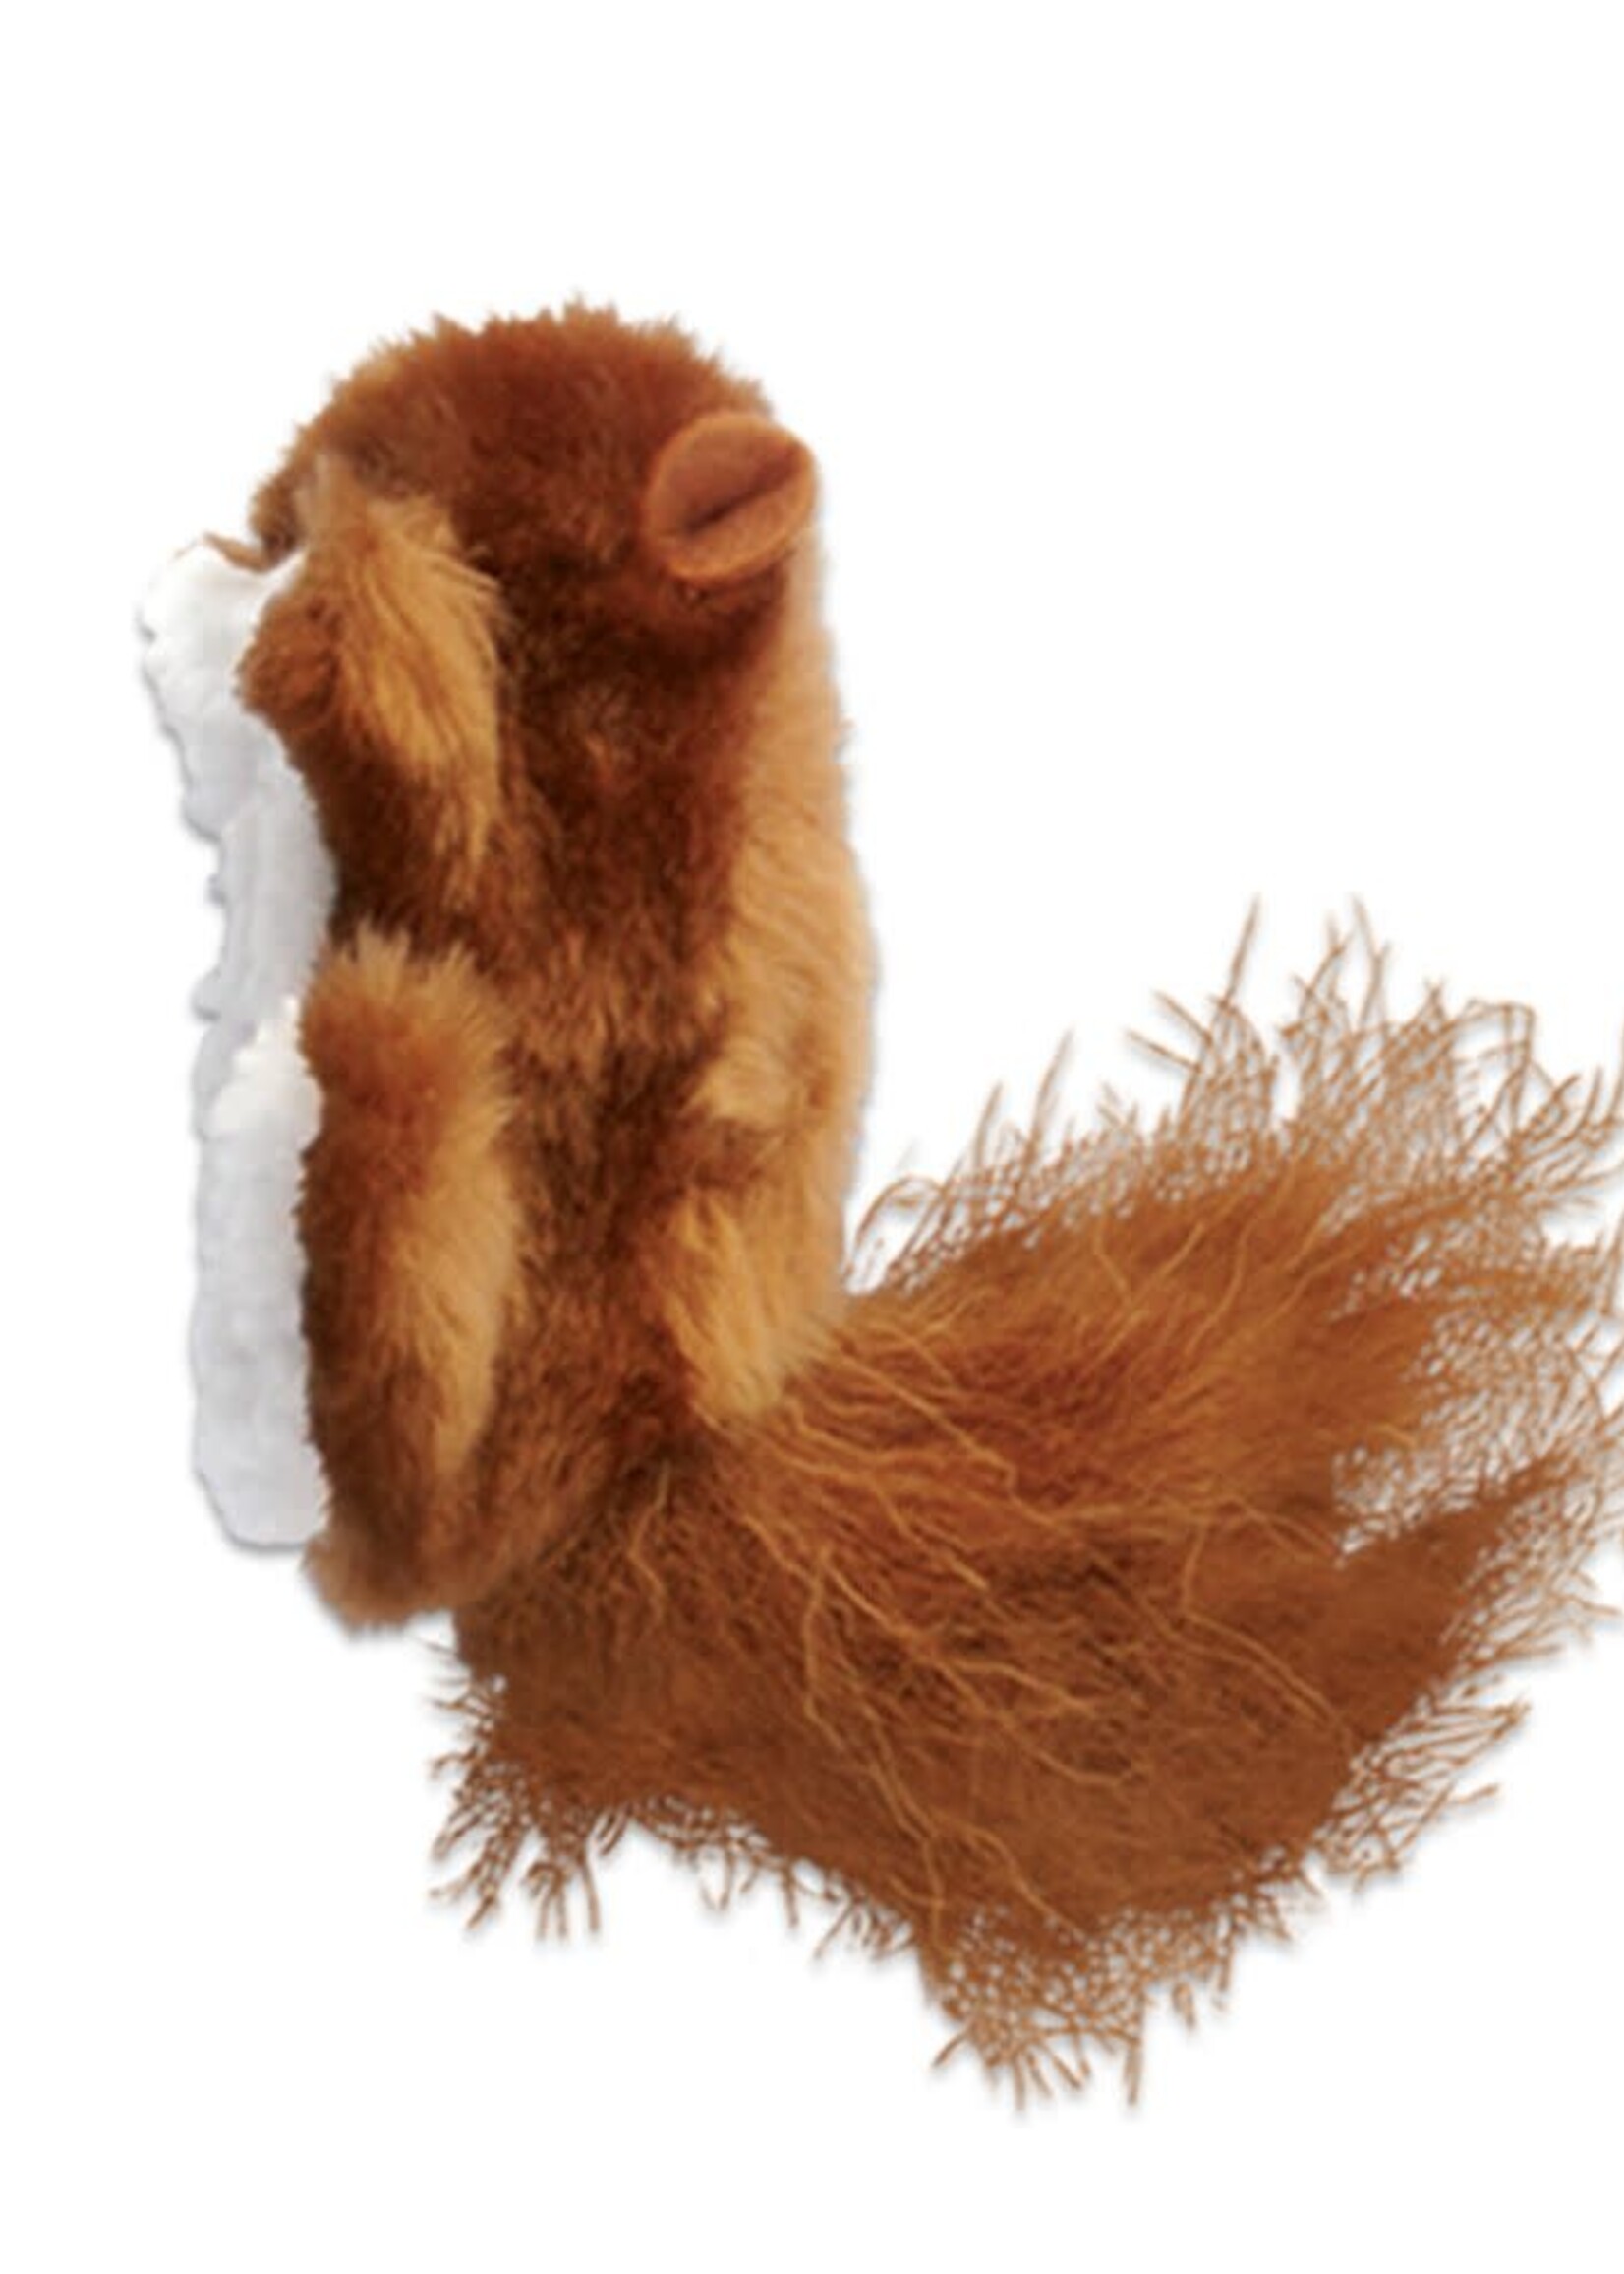 KONG Company KONG Refillables Squirrel Brown Catnip Cat Toy